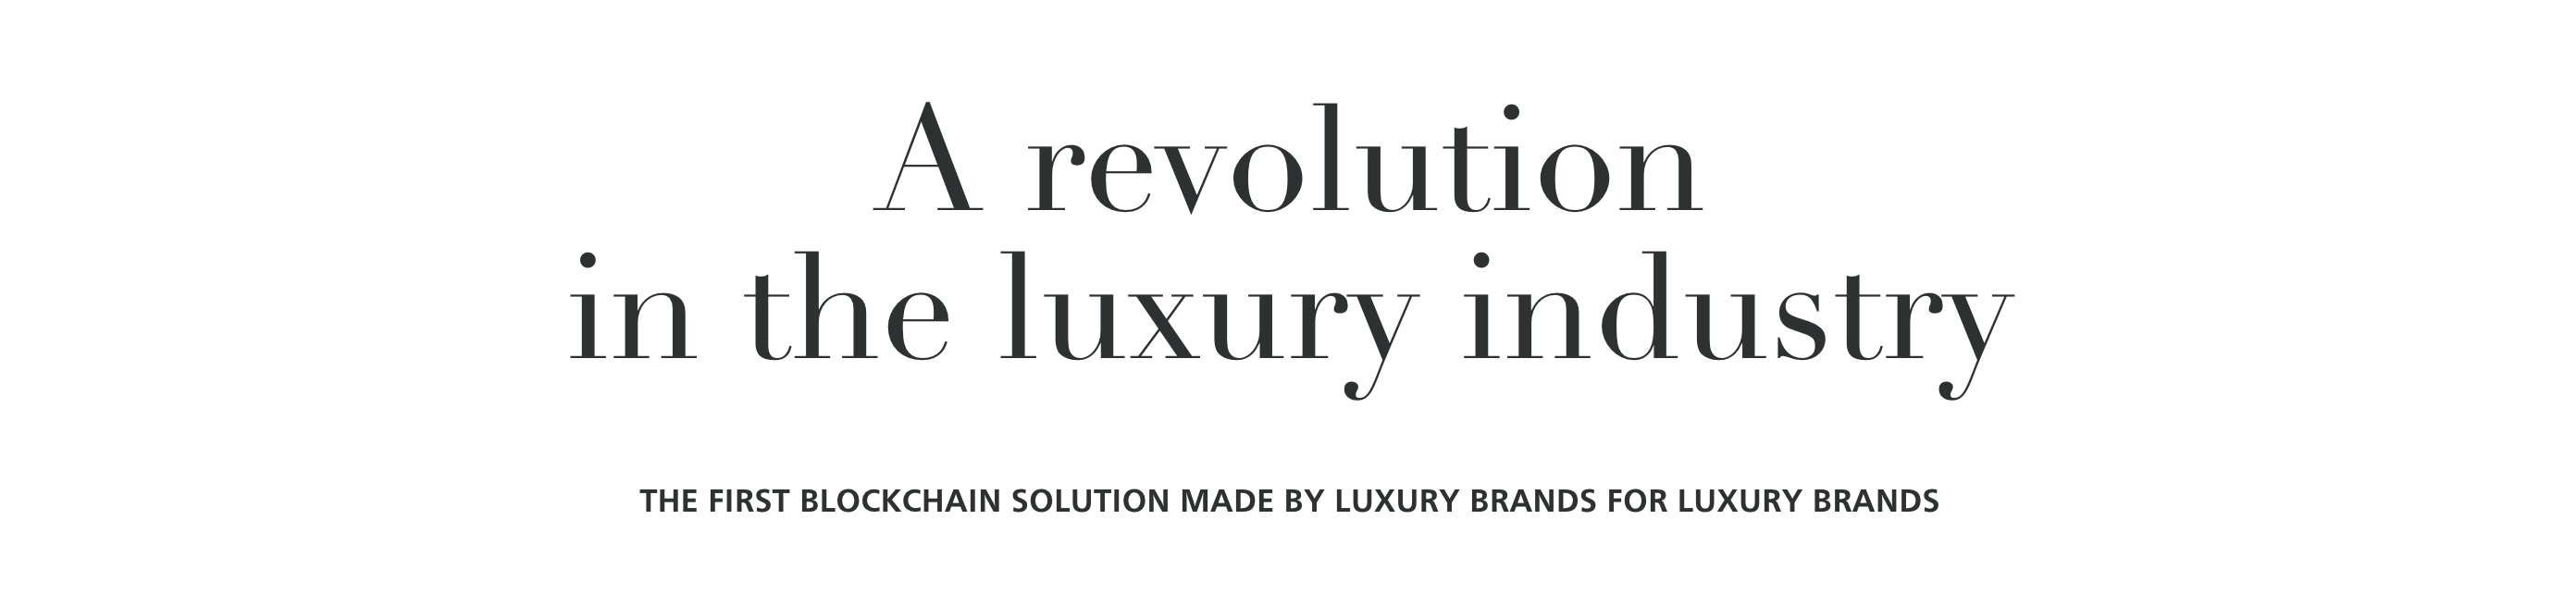 "A revolution in the luxury industry" banner image screenshot.